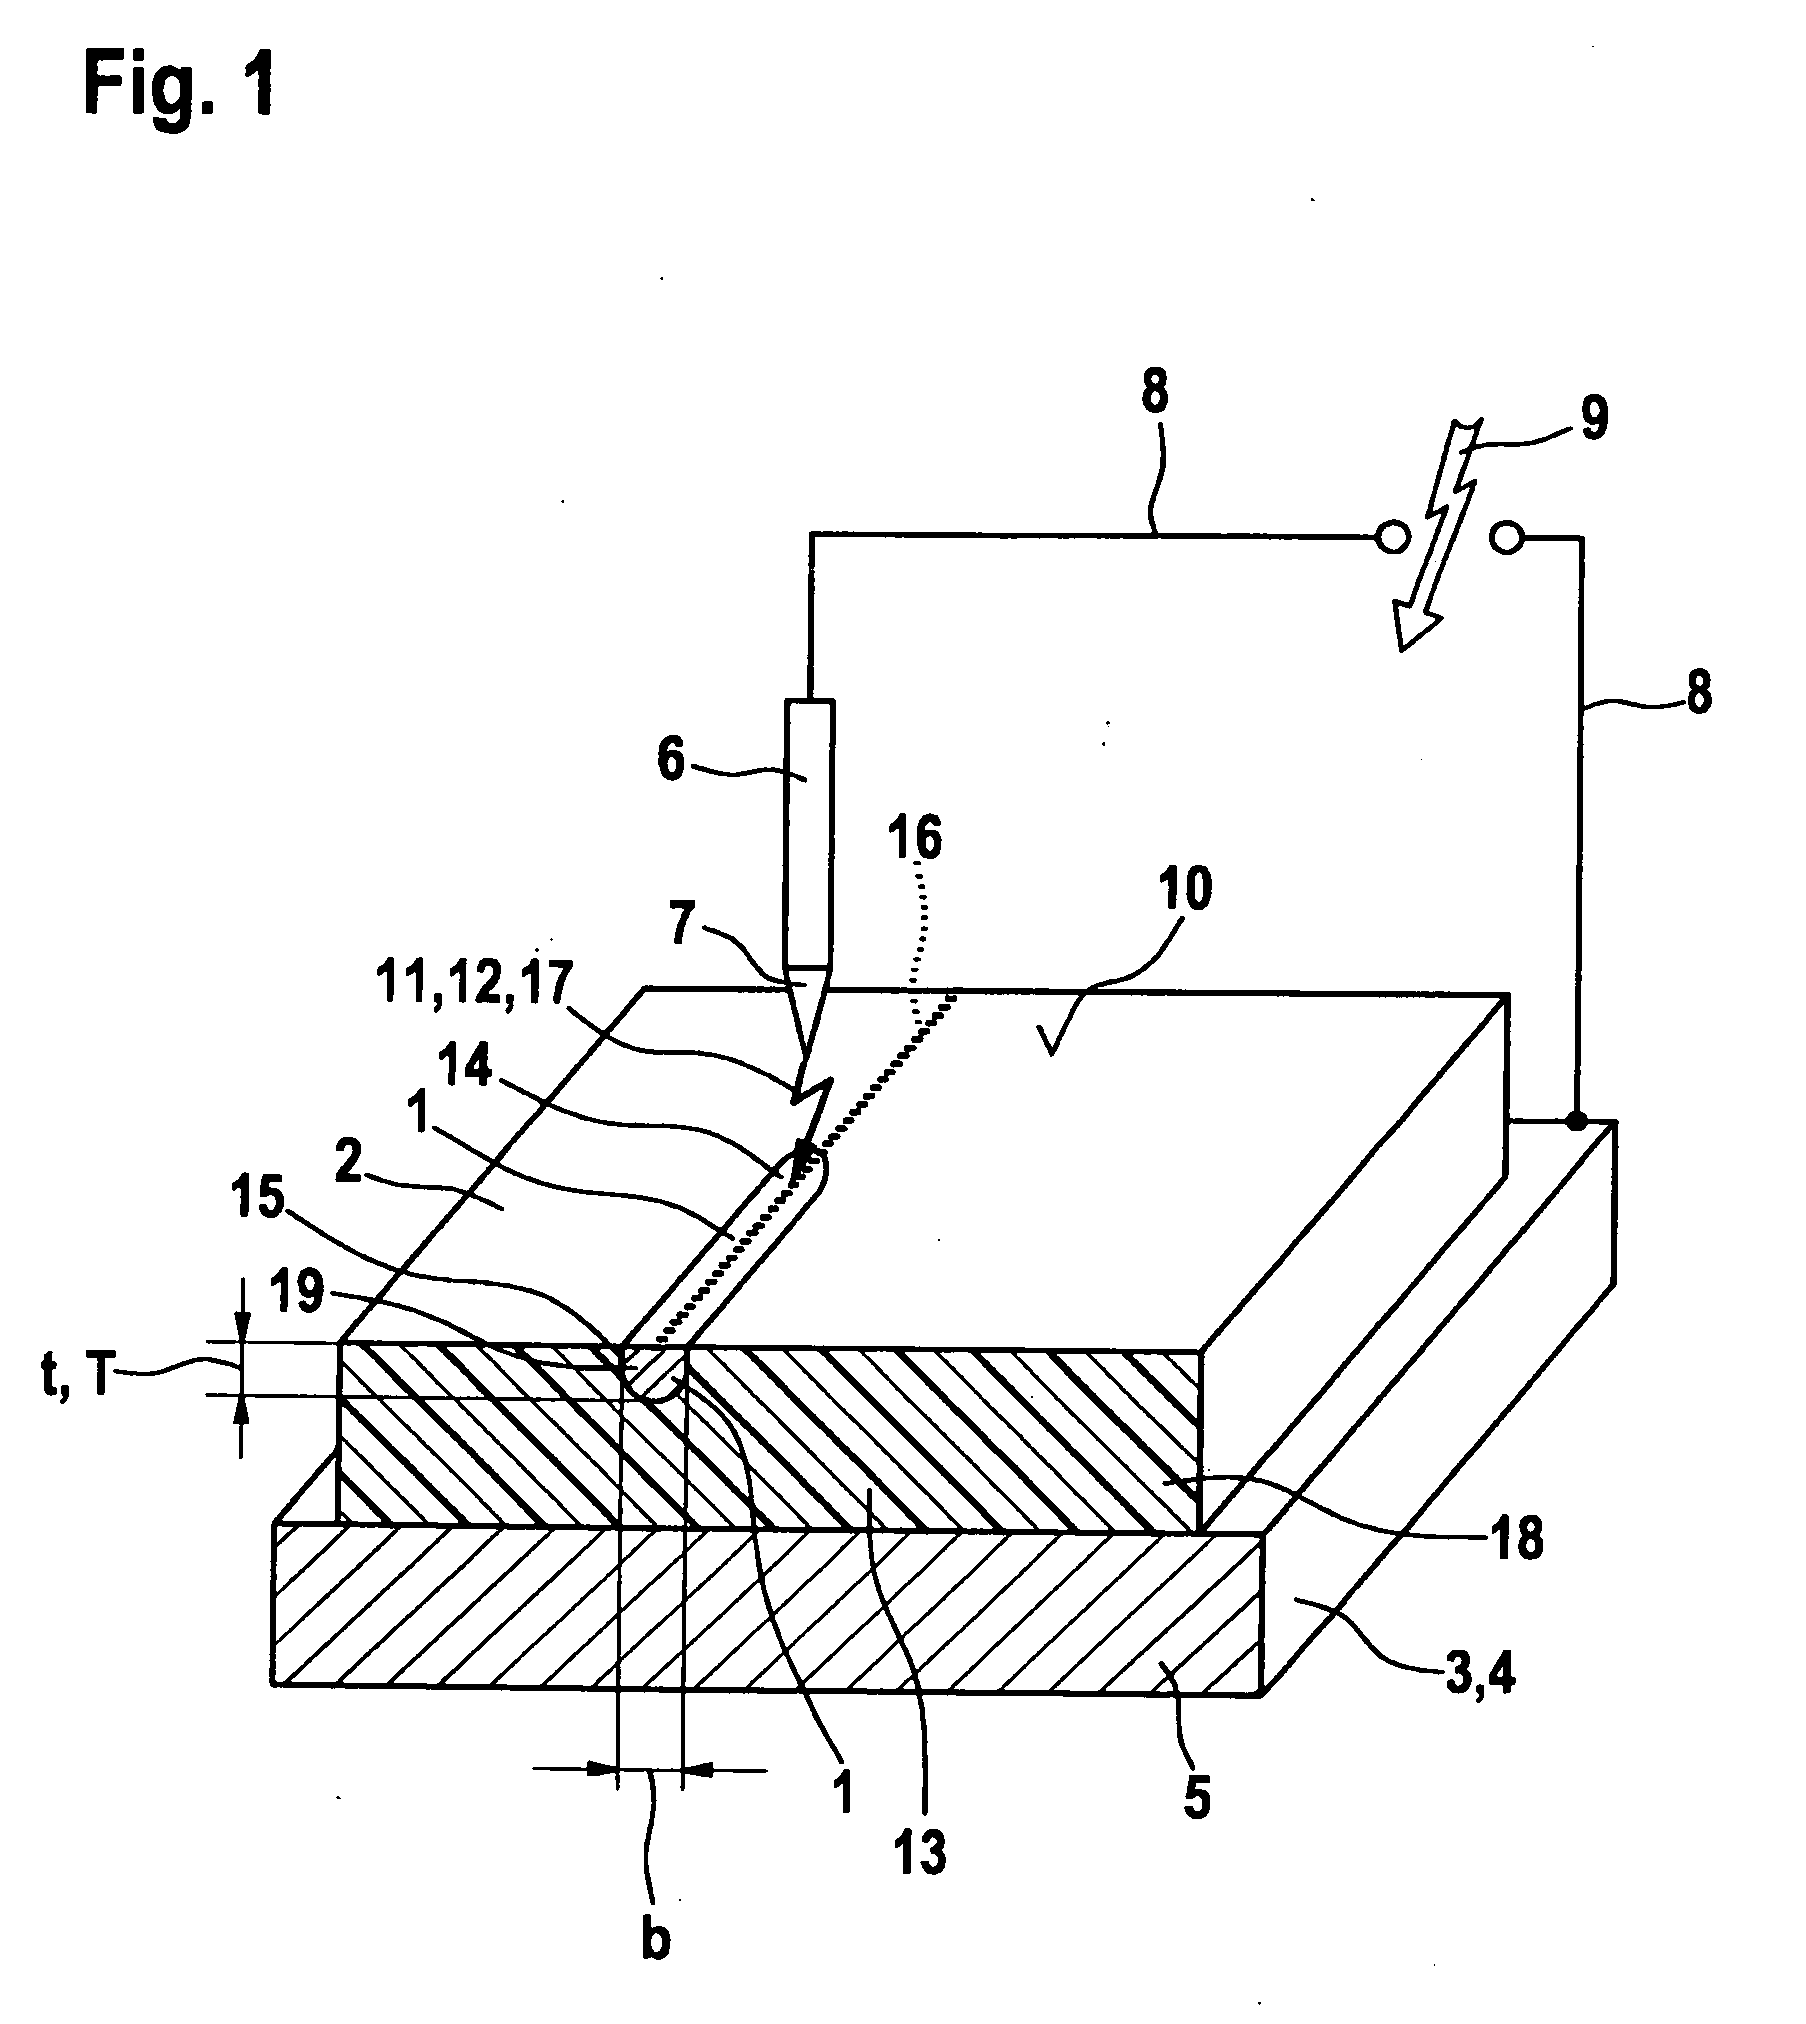 Method for producing an electrically conductive path on a plastic component